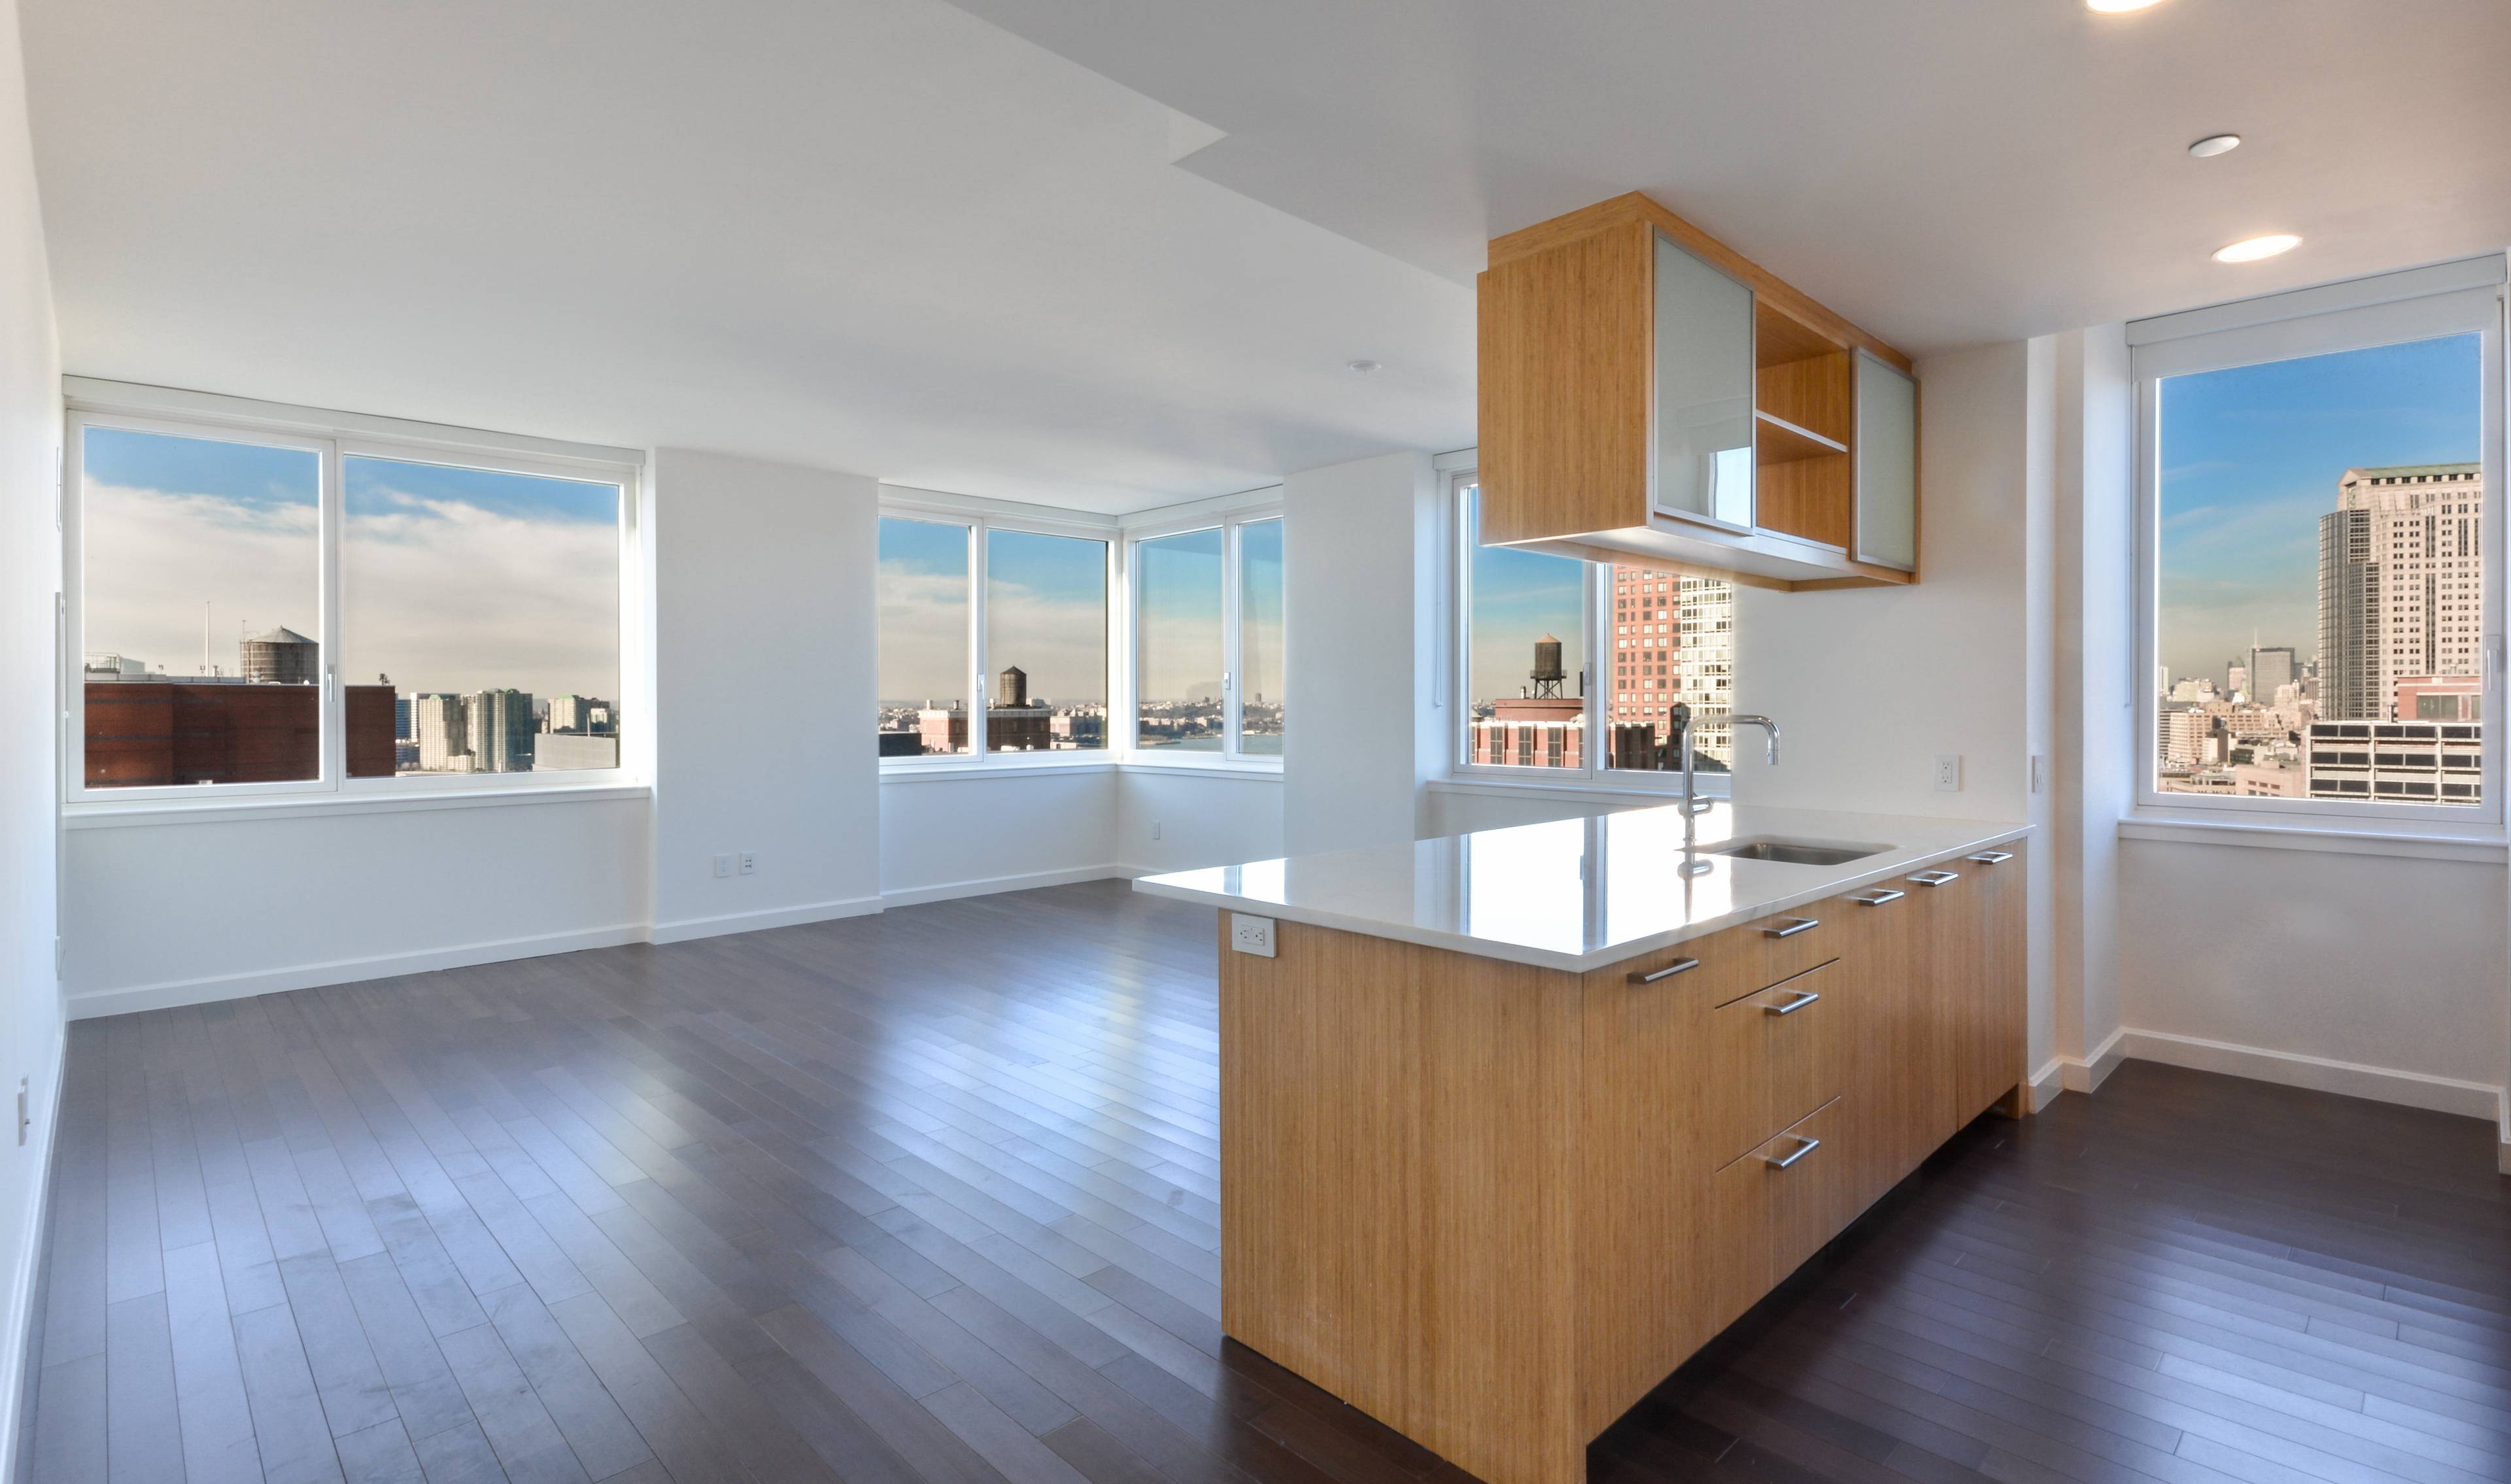 Spacious and Sun-filled 3 Bedroom Luxury in Battery Park City, Not to Be Missed